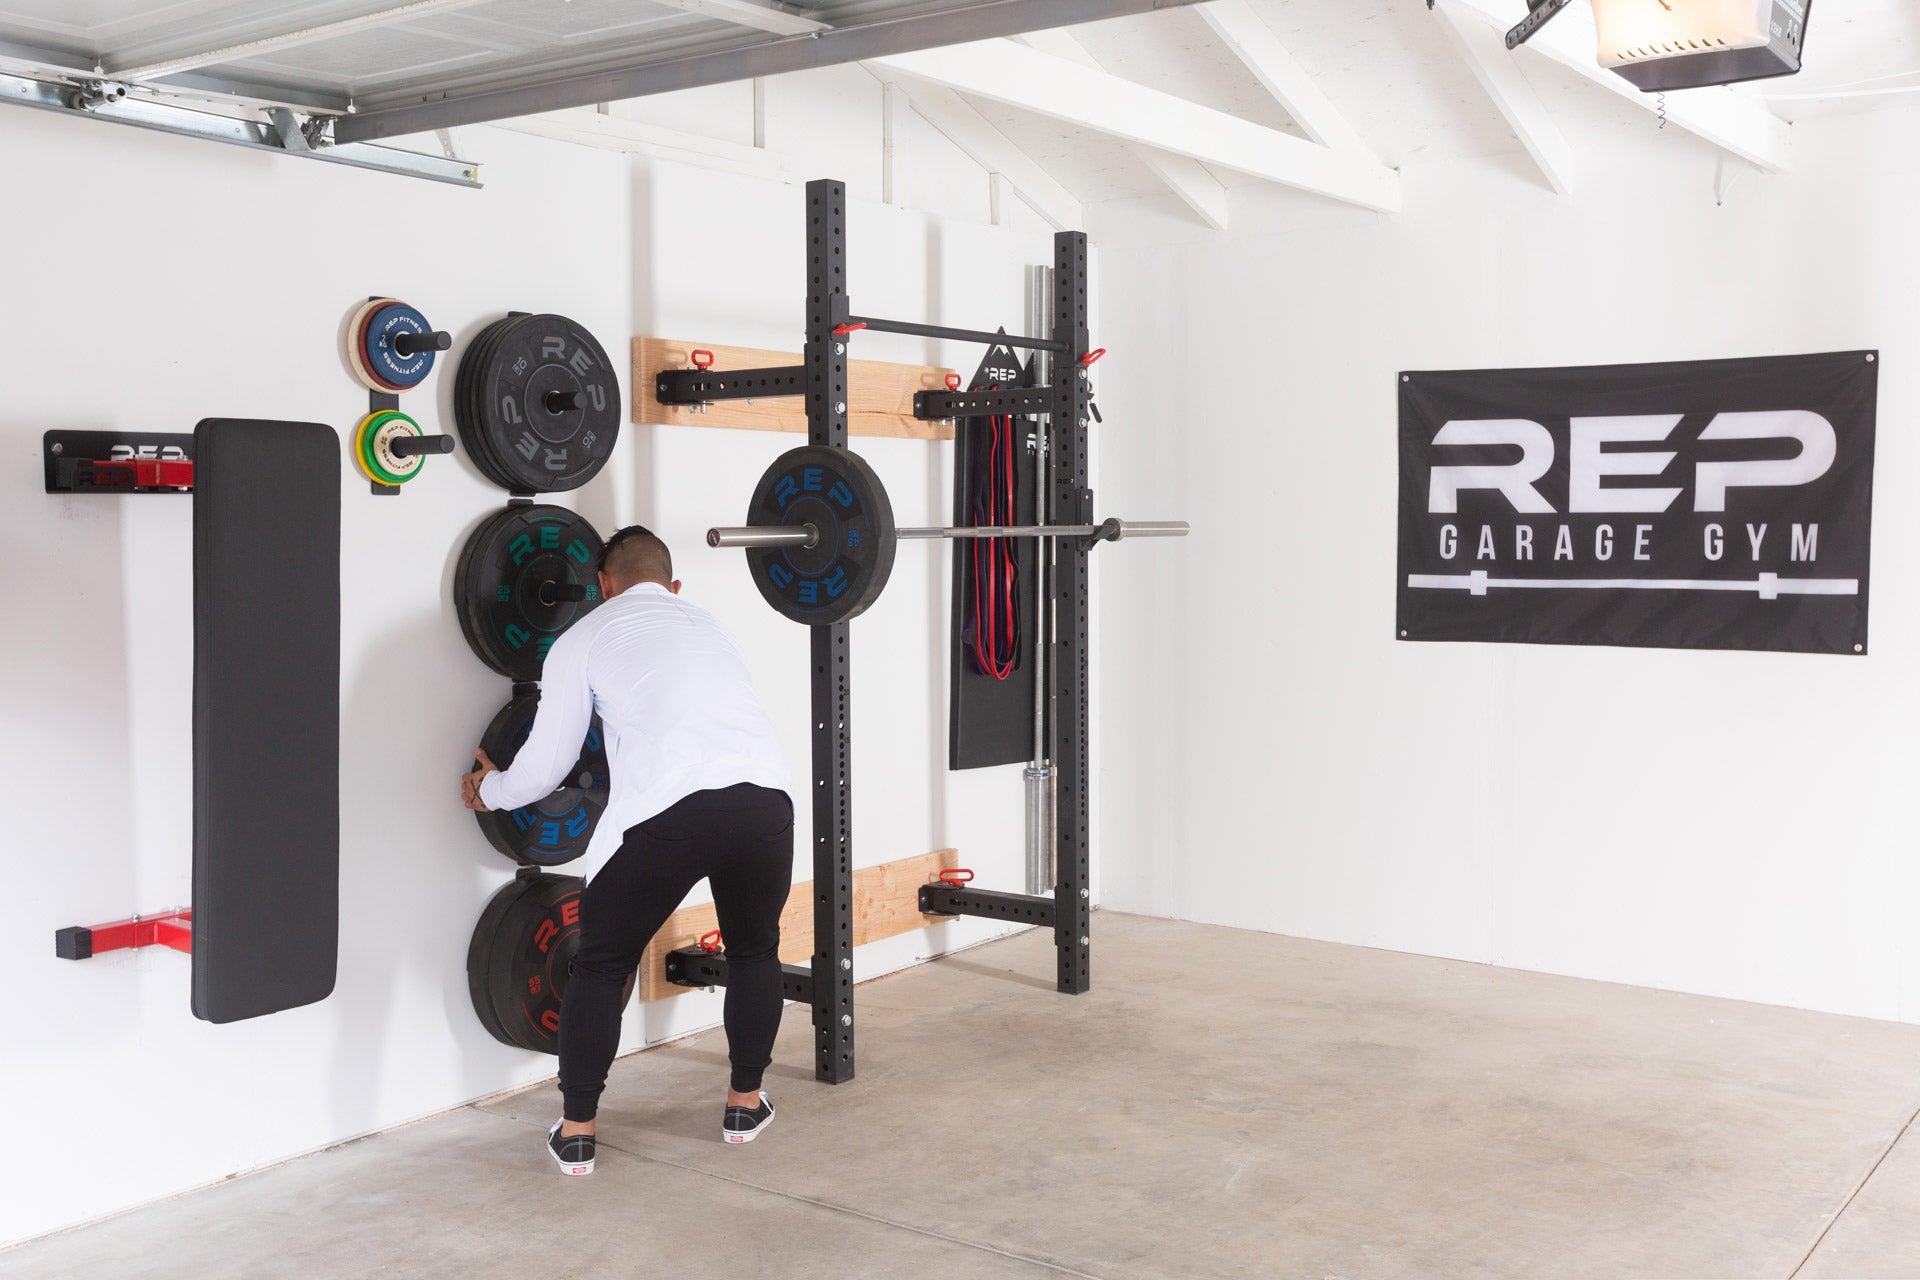 A lifter in a garage gym removing a 45lb bumper plate from a single Wall Mounted Plate Storage to put on a racked barbell.